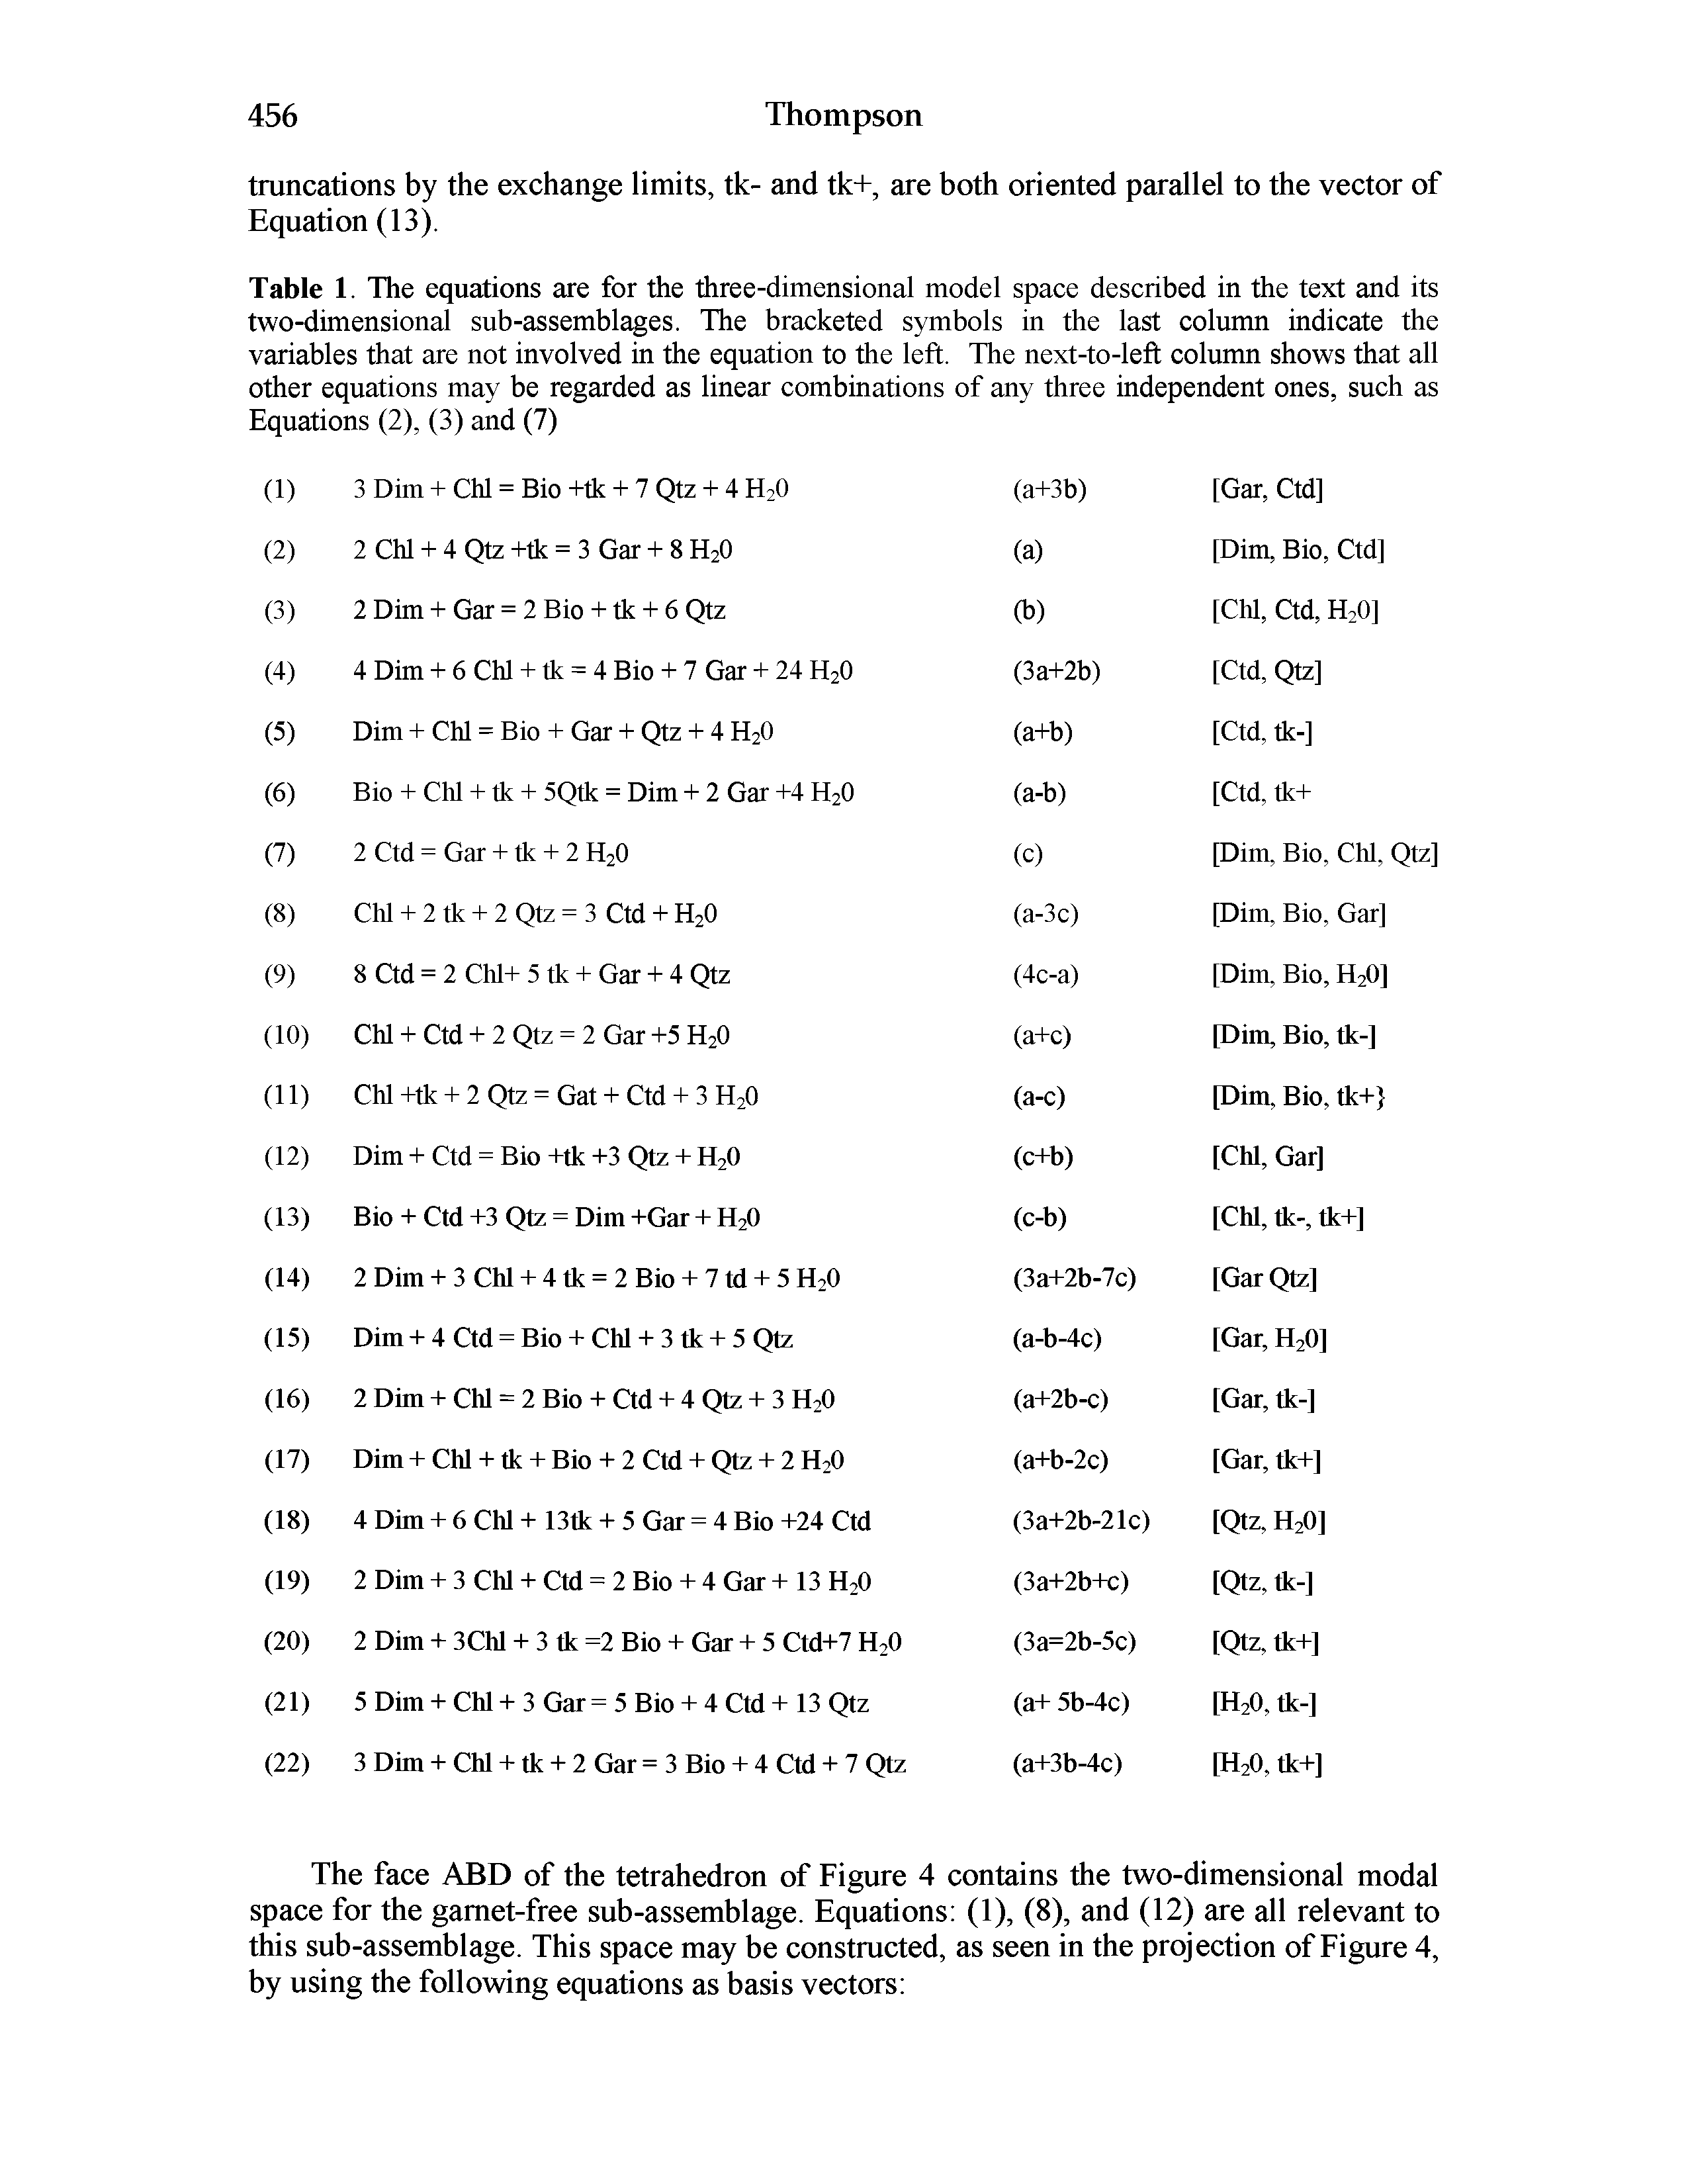 Table 1. The equations are for the three-dimensional model space described in the text and its two-dimensional sub-assemblages. The bracketed symbols in the last column indicate the variables that are not involved in the equation to the left. The next-to-left column shows that all other equations may be regarded as linear combinations of any three independent ones, such as Equations (2), (3) and (7)...